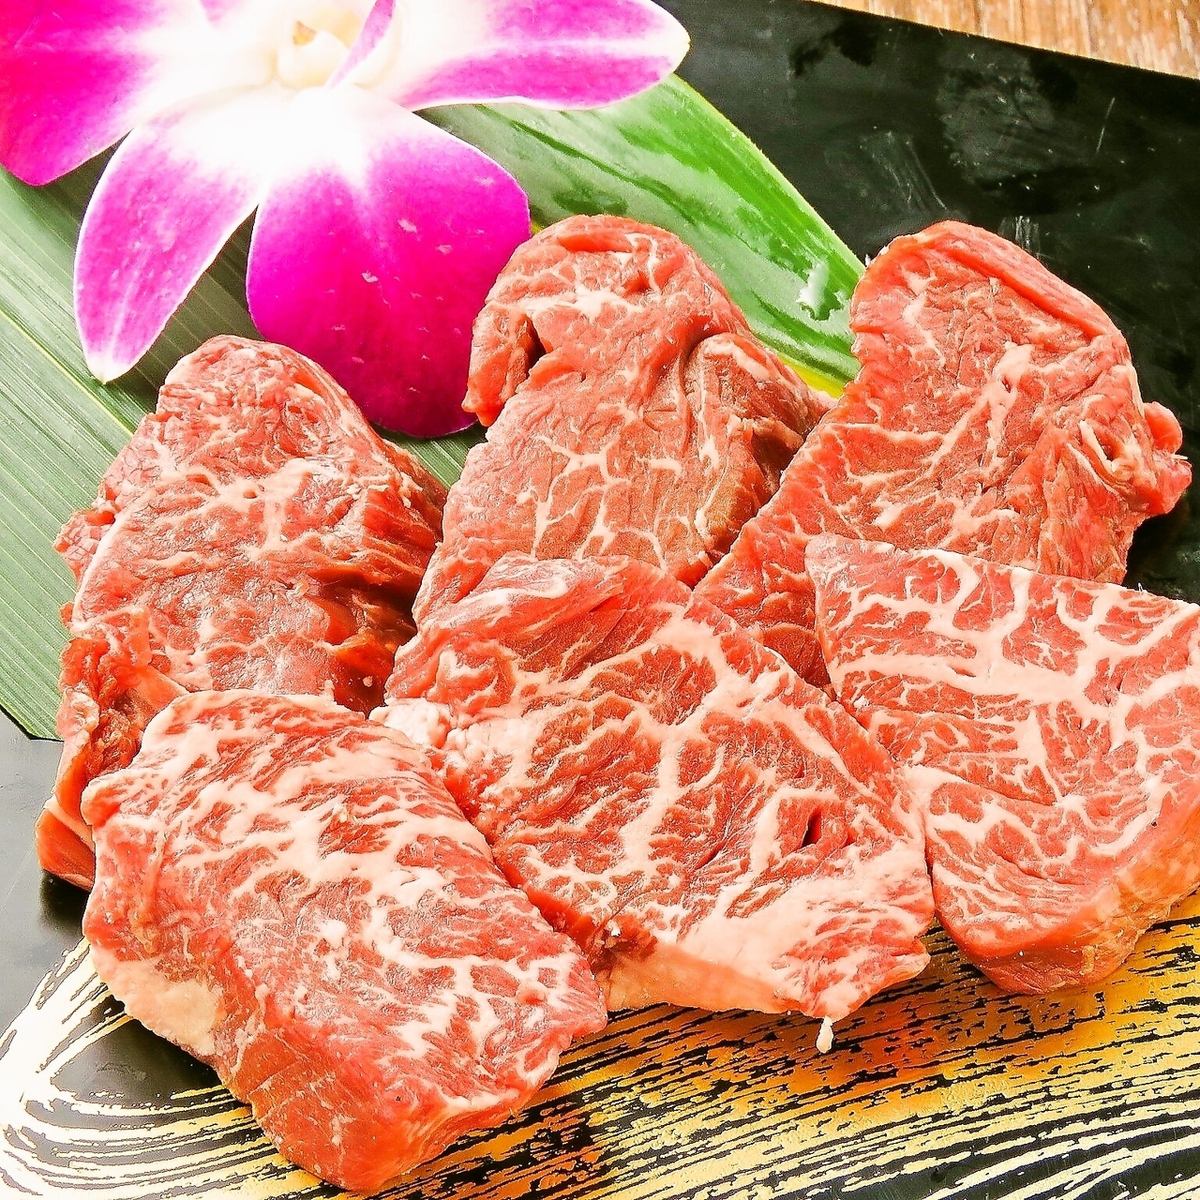 You're sure to be satisfied with our carefully sourced A5 rank Wagyu beef!